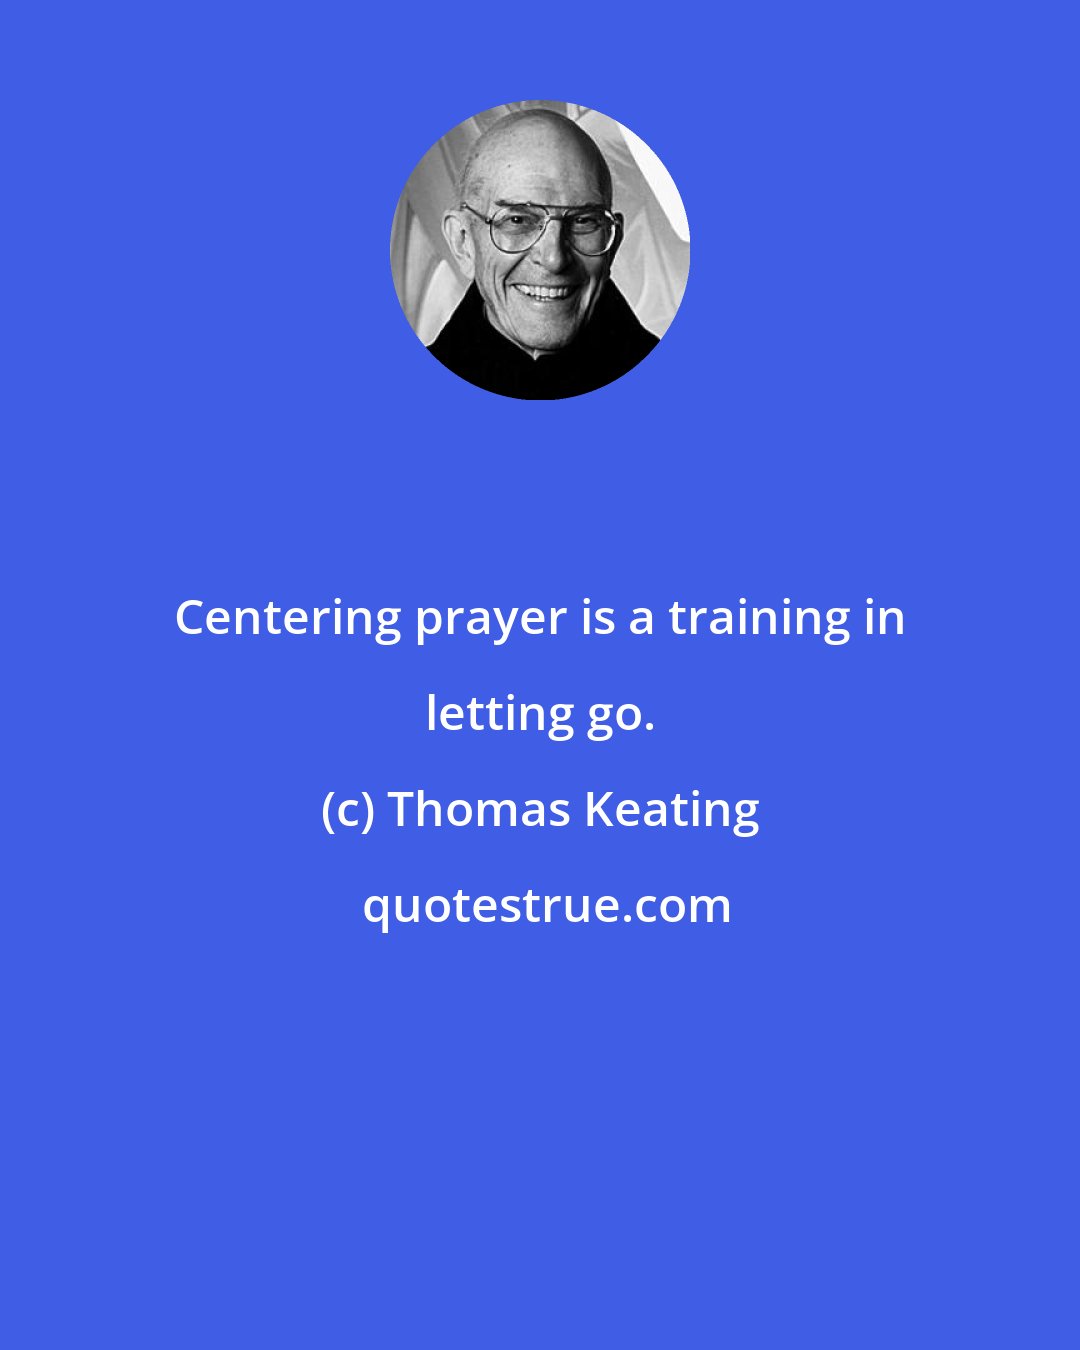 Thomas Keating: Centering prayer is a training in letting go.